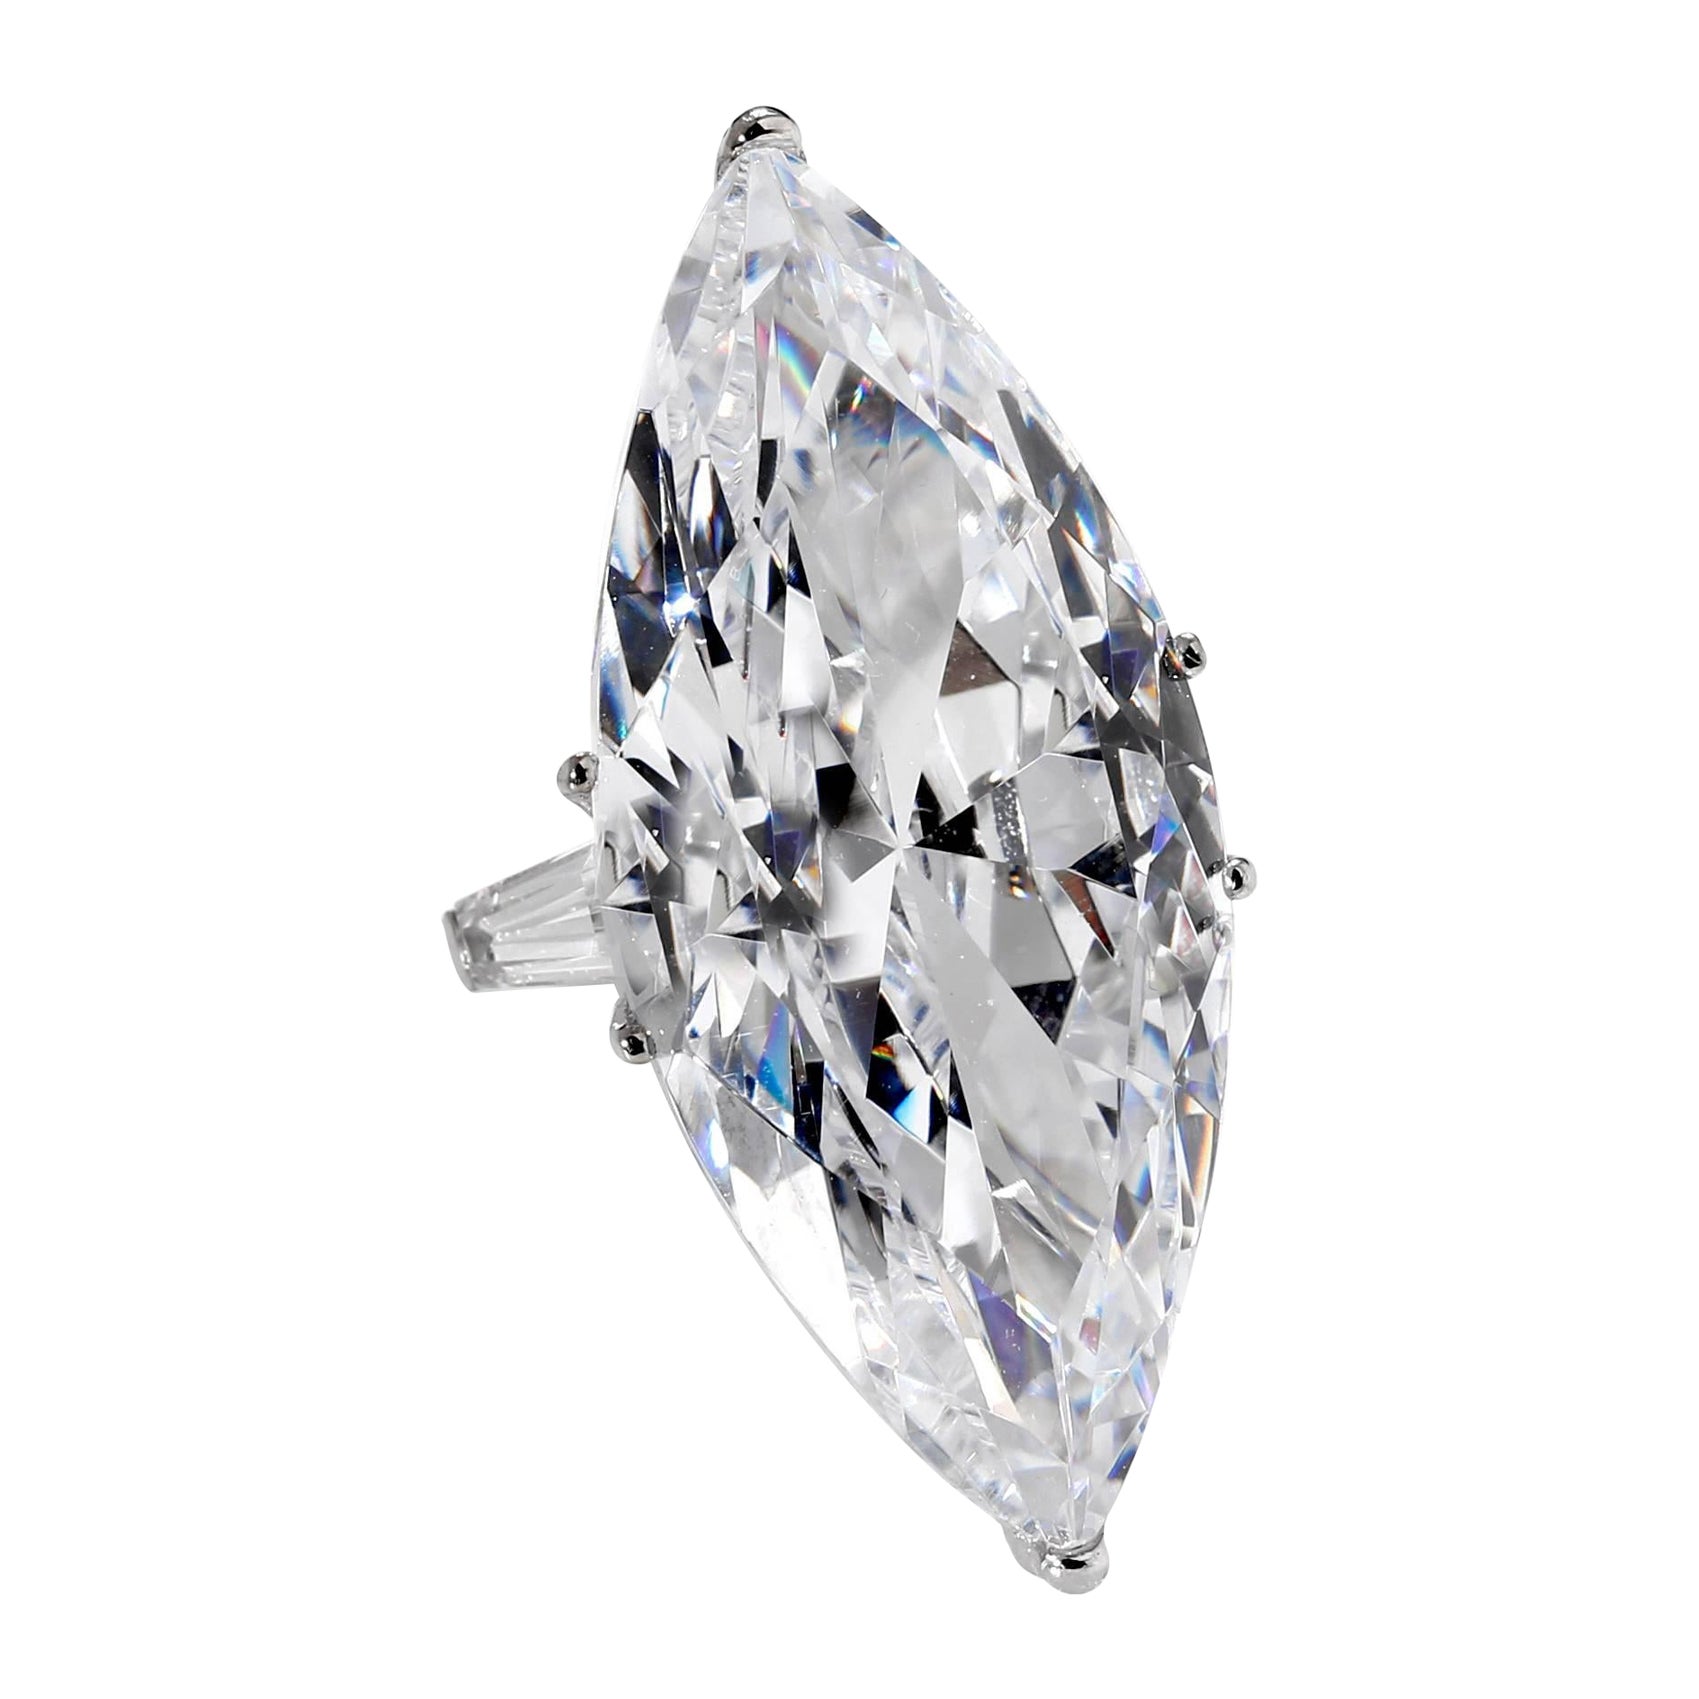 The Jackie O Faux CZ Lesotho 40 Carat Marquise Diamond Ring Copy by Clive Kandel